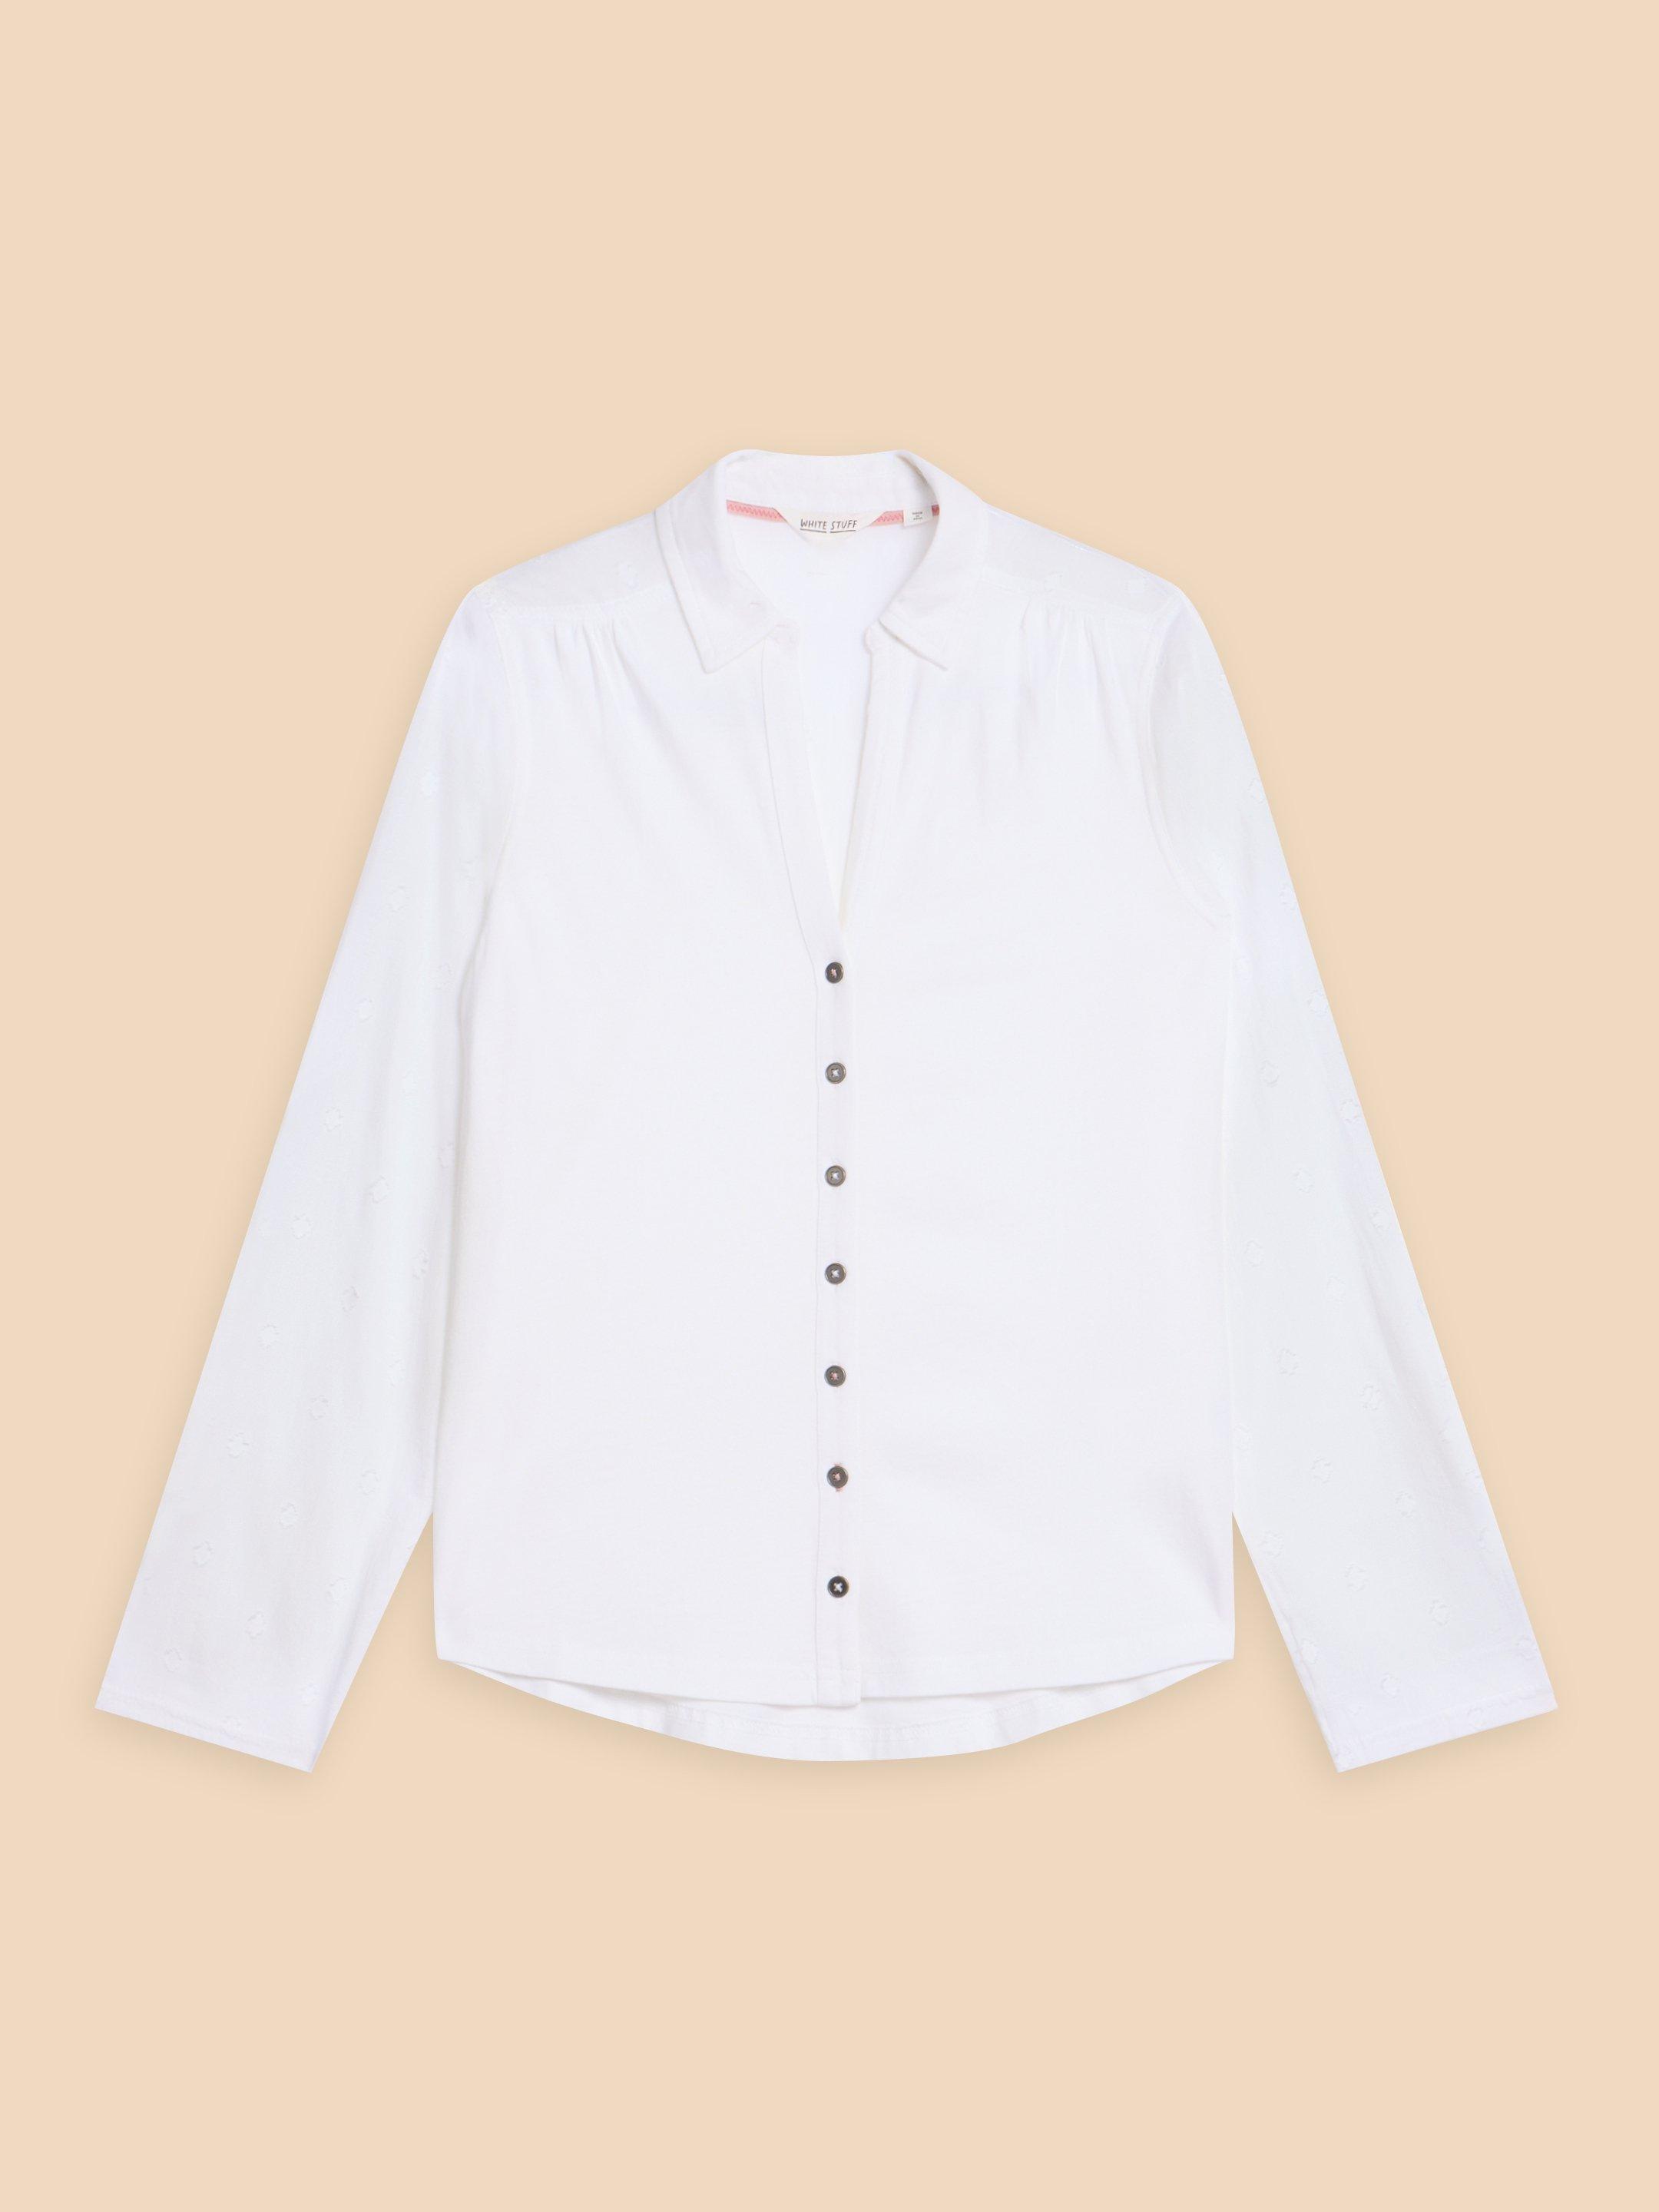 ANNIE MIX JERSEY SHIRT in PALE IVORY - FLAT FRONT